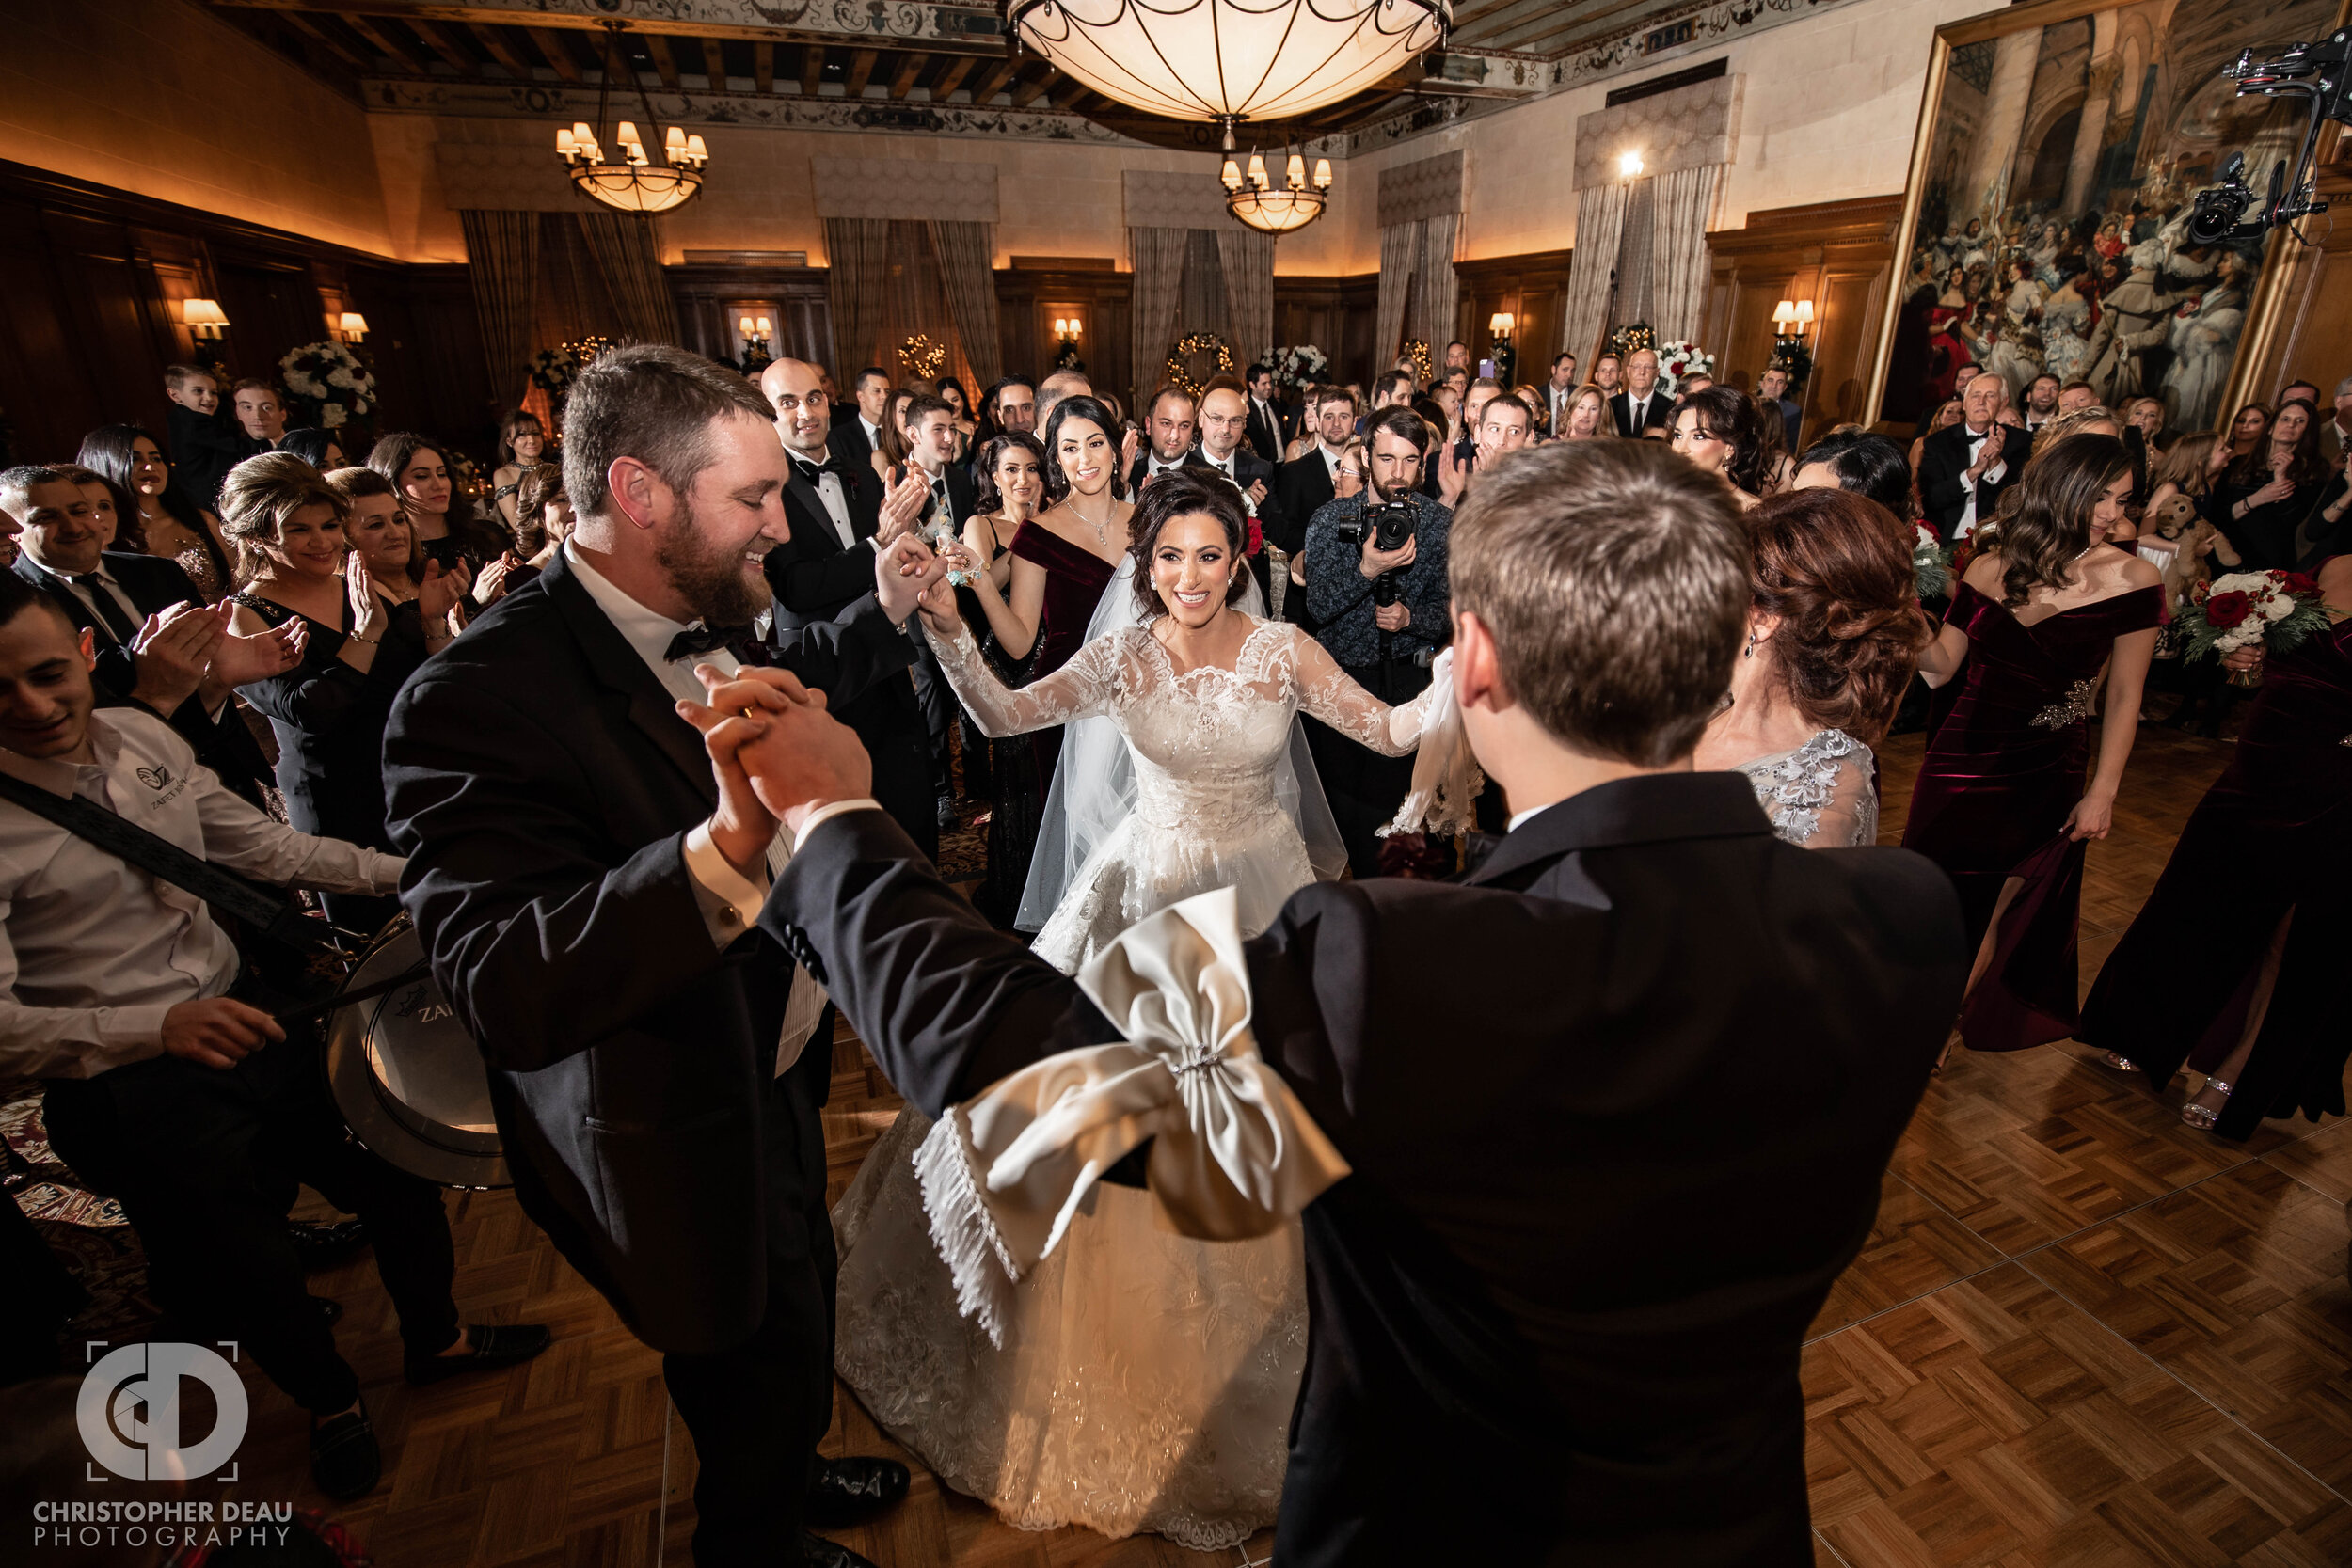  The bride and groom dance with their family and guests during the Chaldean Zaffa ceremony 